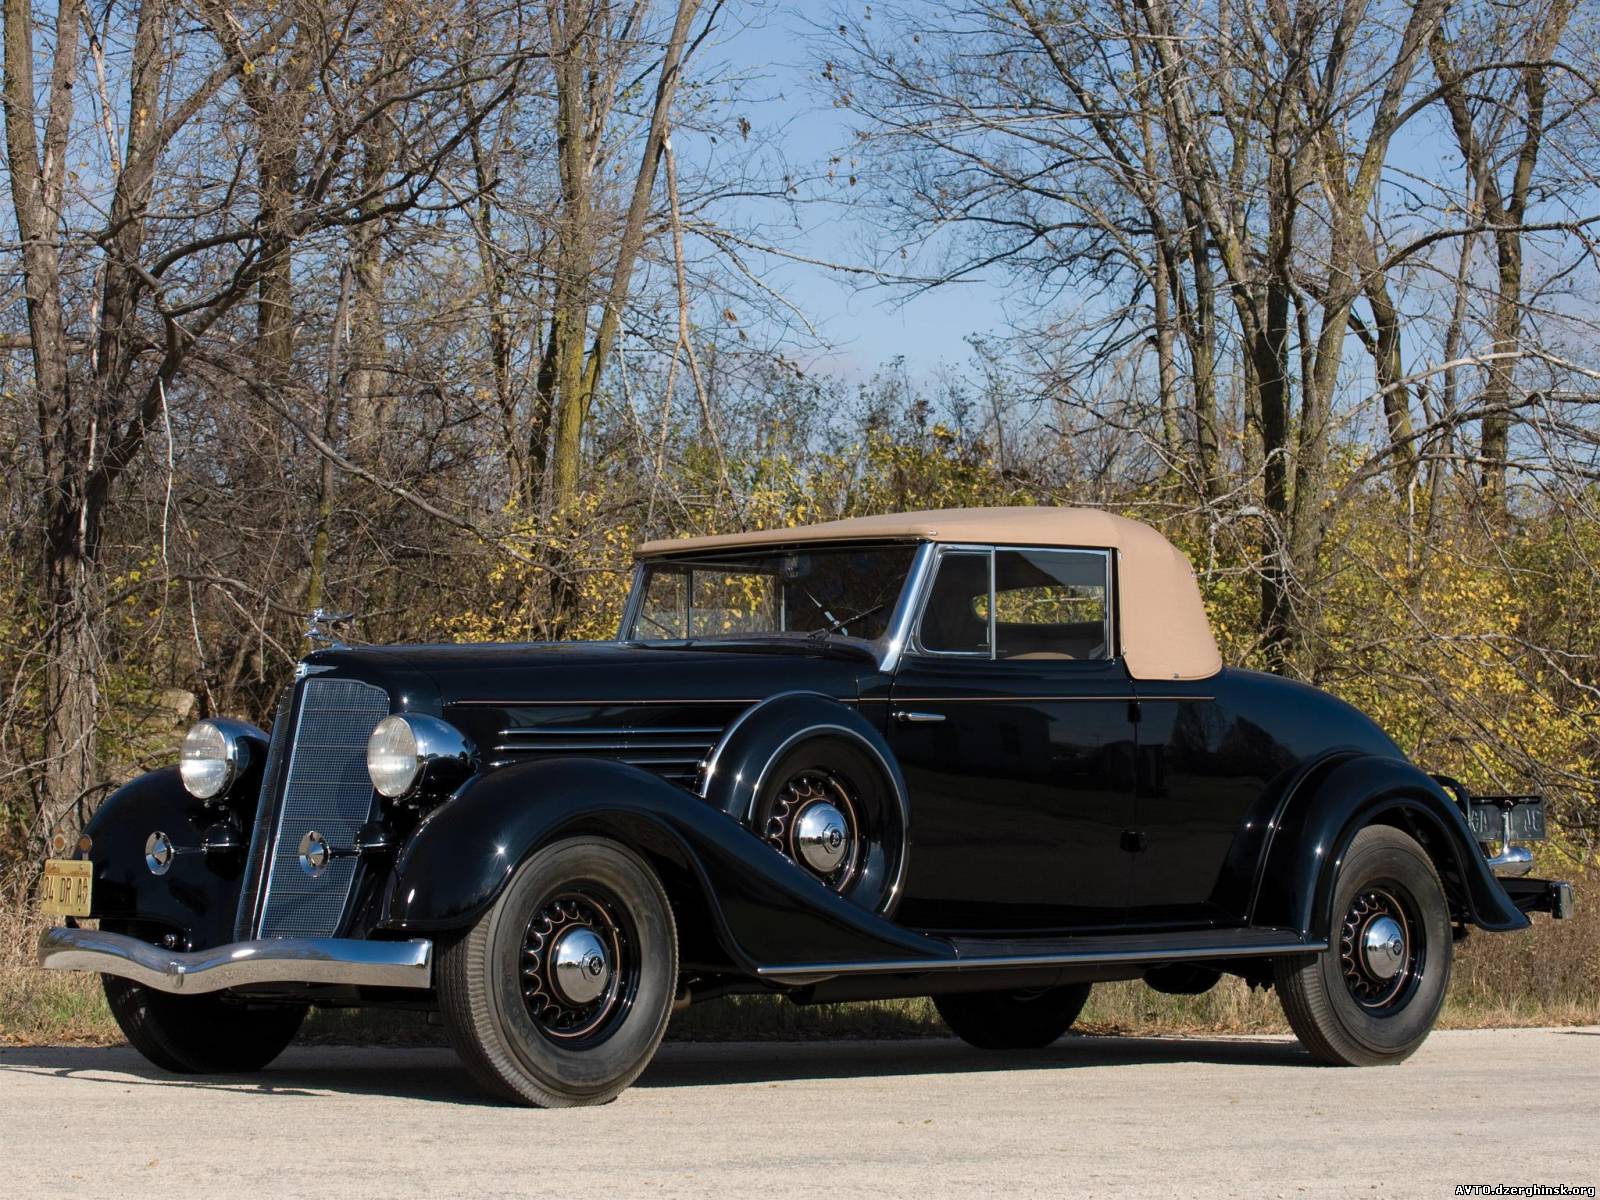 001. 1934 Buick Series  90 Convertible Coupe